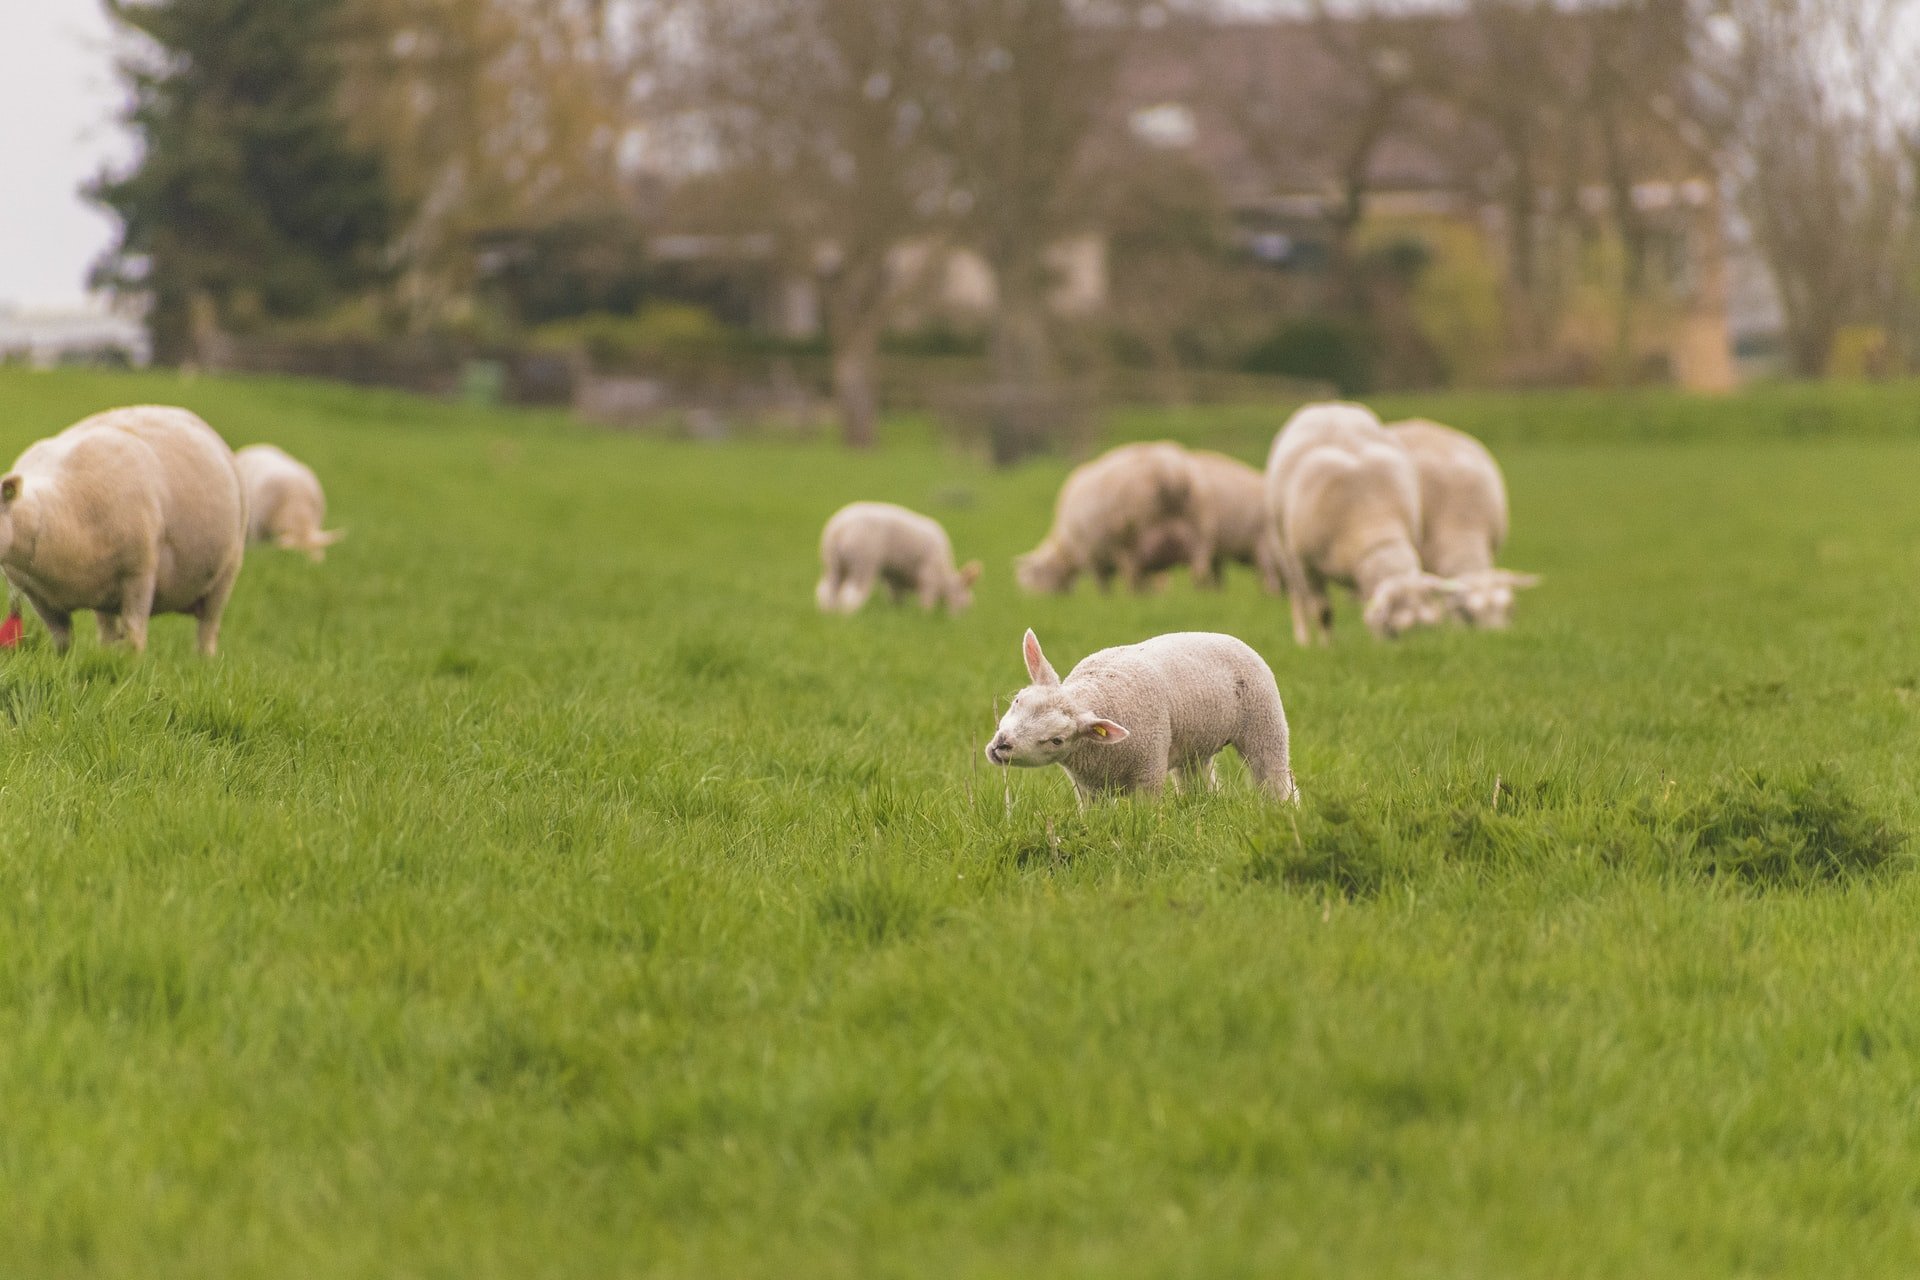 Sheep eat the grass in a beautiful green pasture